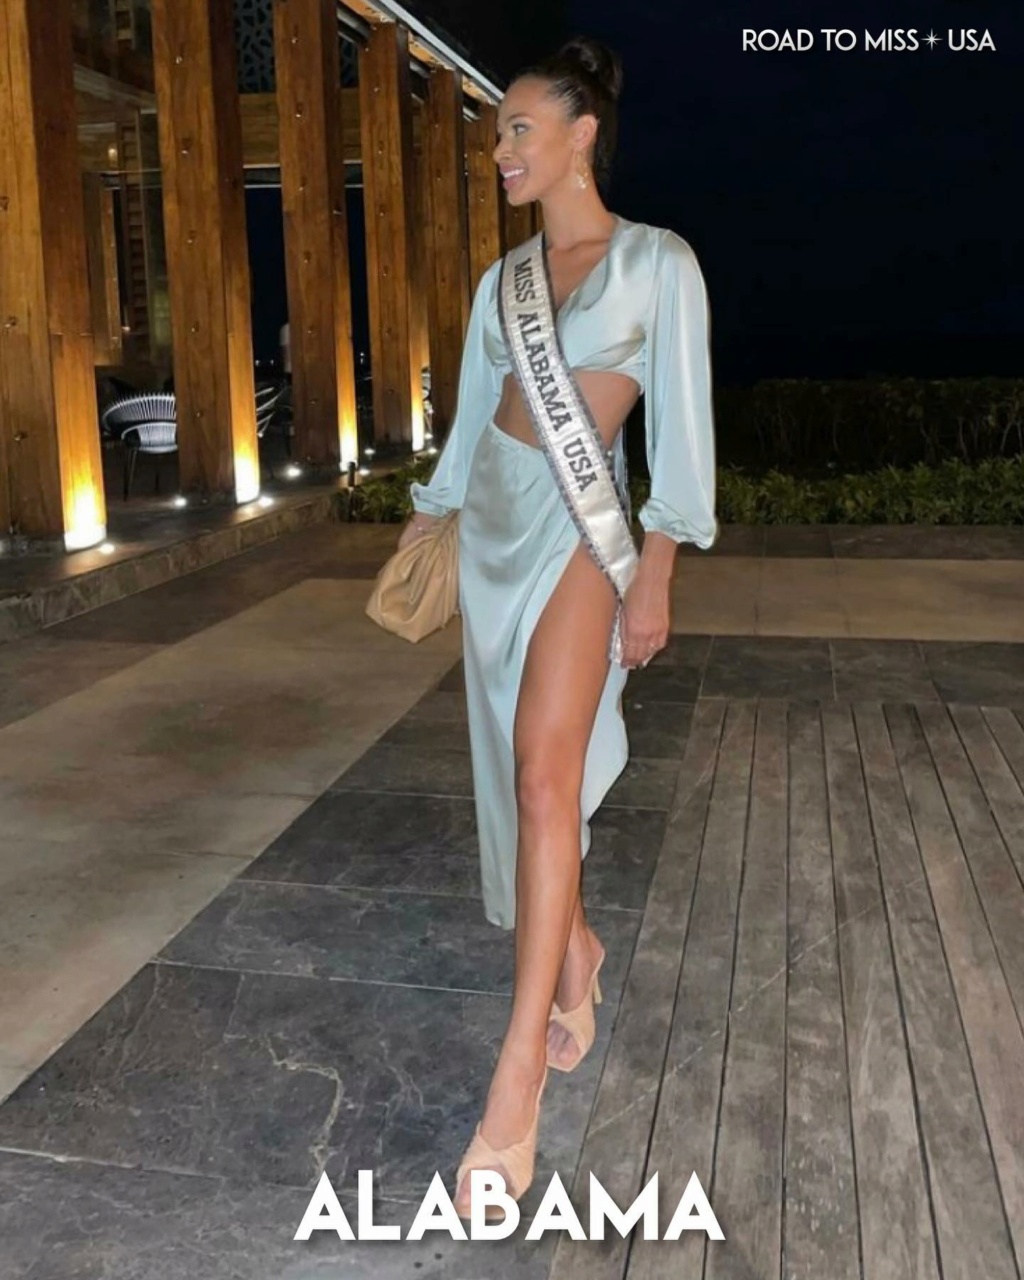 ROAD TO MISS USA 2021 is KENTUCKY! - Page 3 24212411